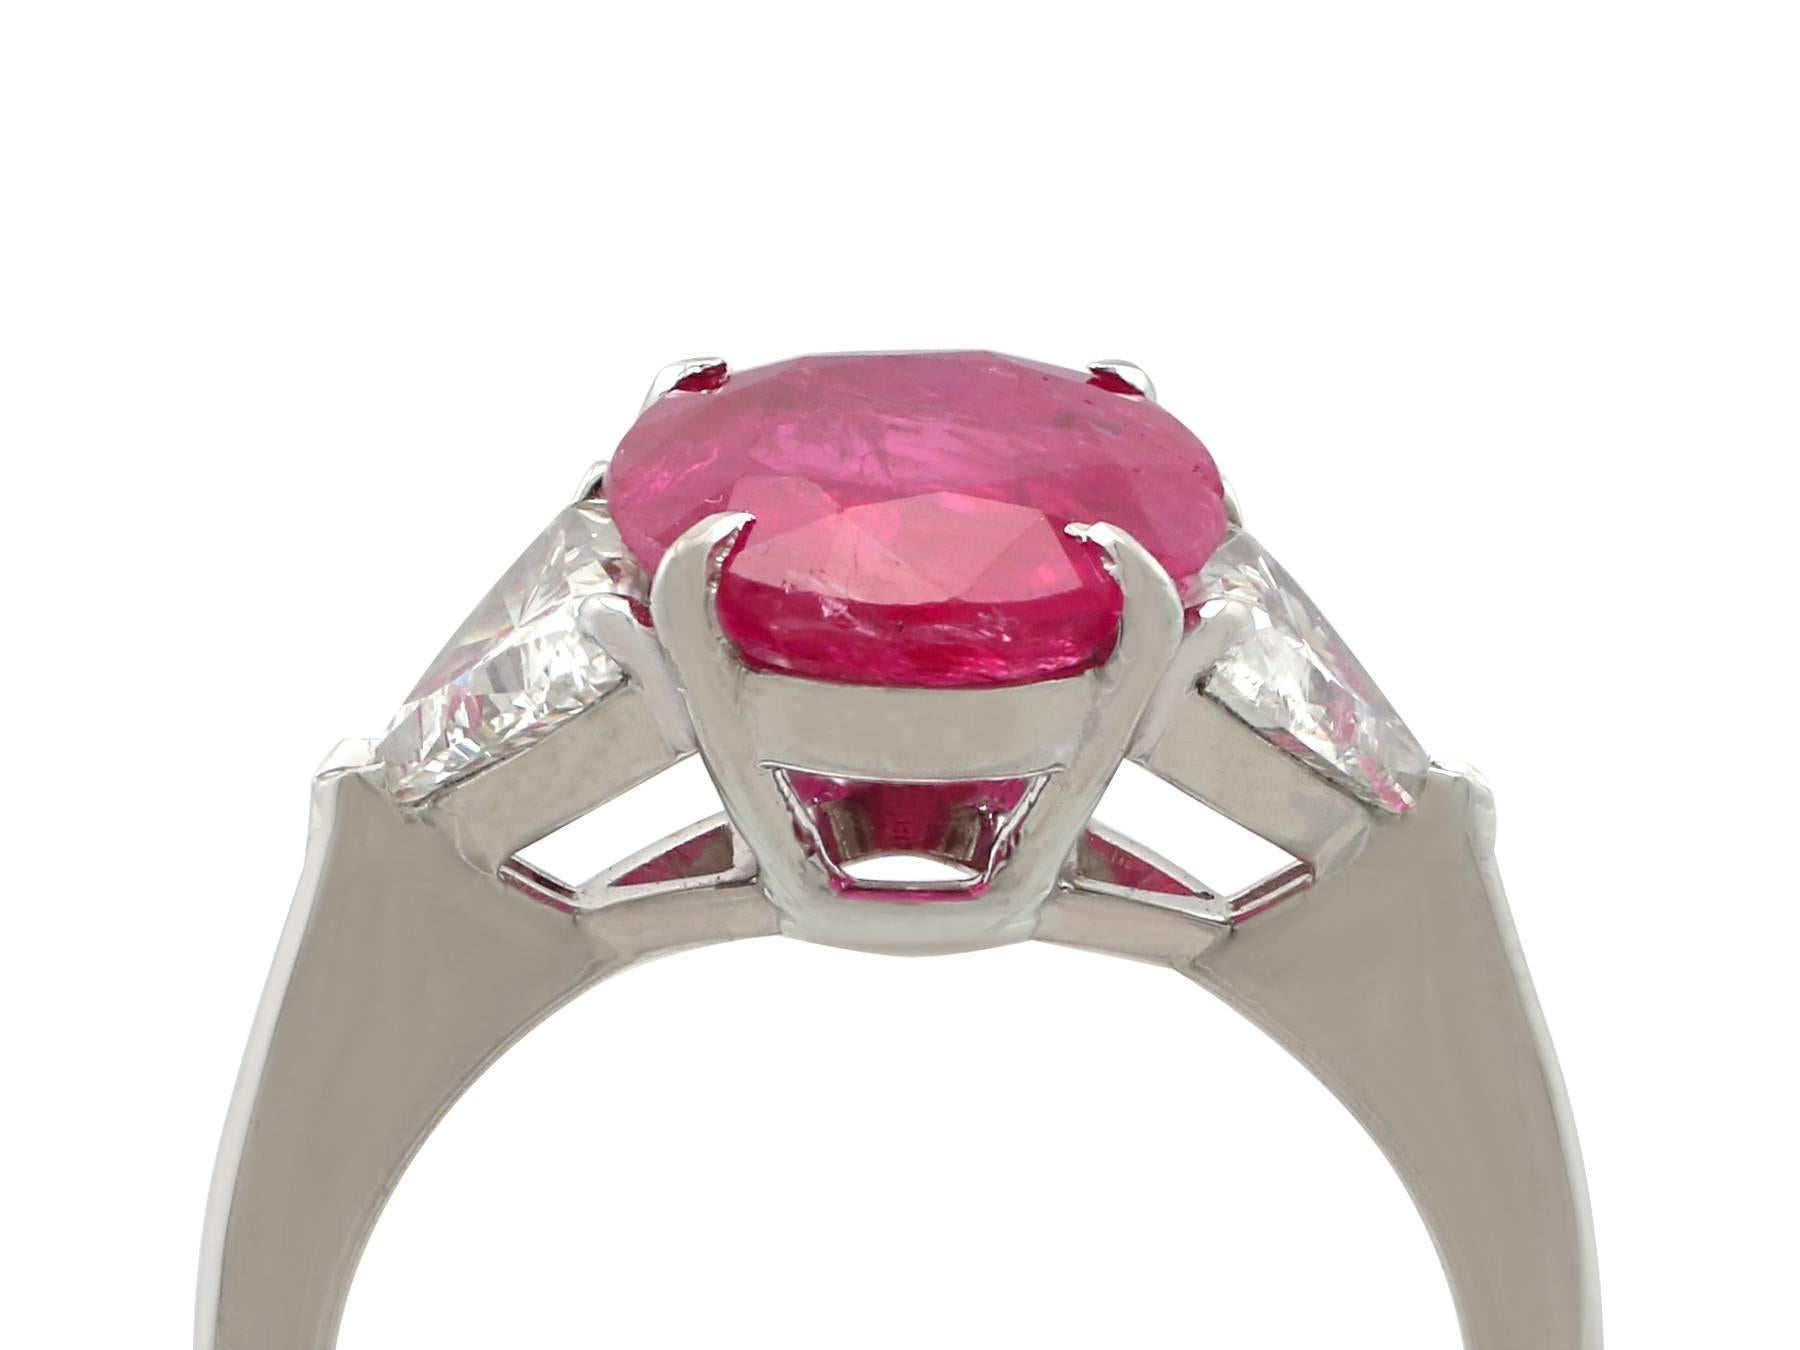 
A stunning vintage 3.38 carat Burmese ruby, 1.33 carat diamond and platinum dress ring; part of our diverse vintage jewelry and estate jewelry collections

This stunning, fine and impressive GIA certified ruby ring has been crafted in